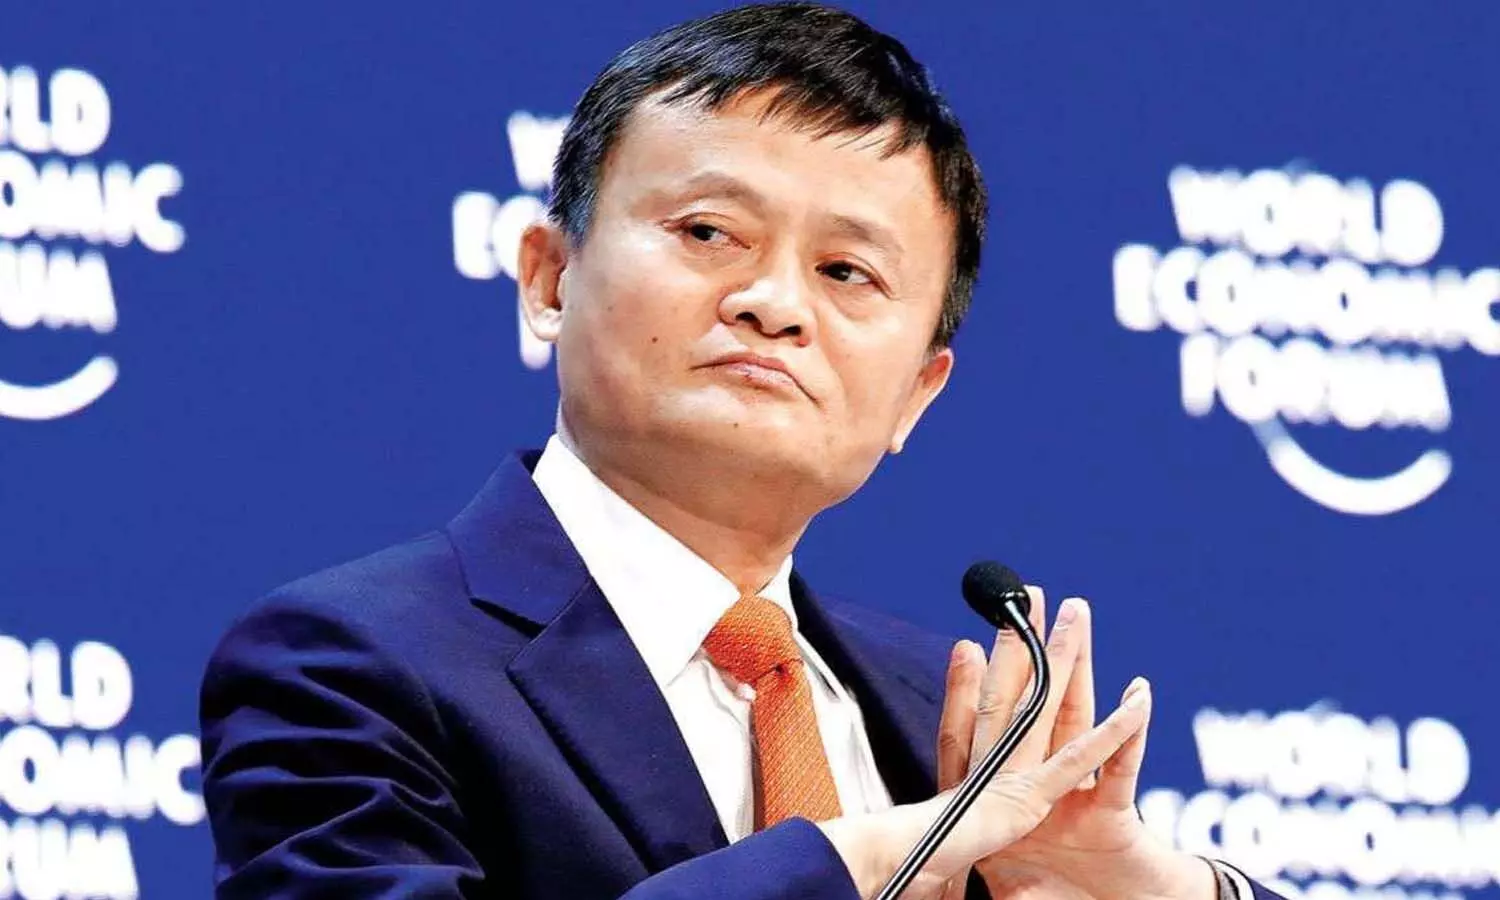 Alibaba Founder Jack Ma: Big blow to billionaire businessman Jack Ma, shares of billions of dollars sunk due to a rumor